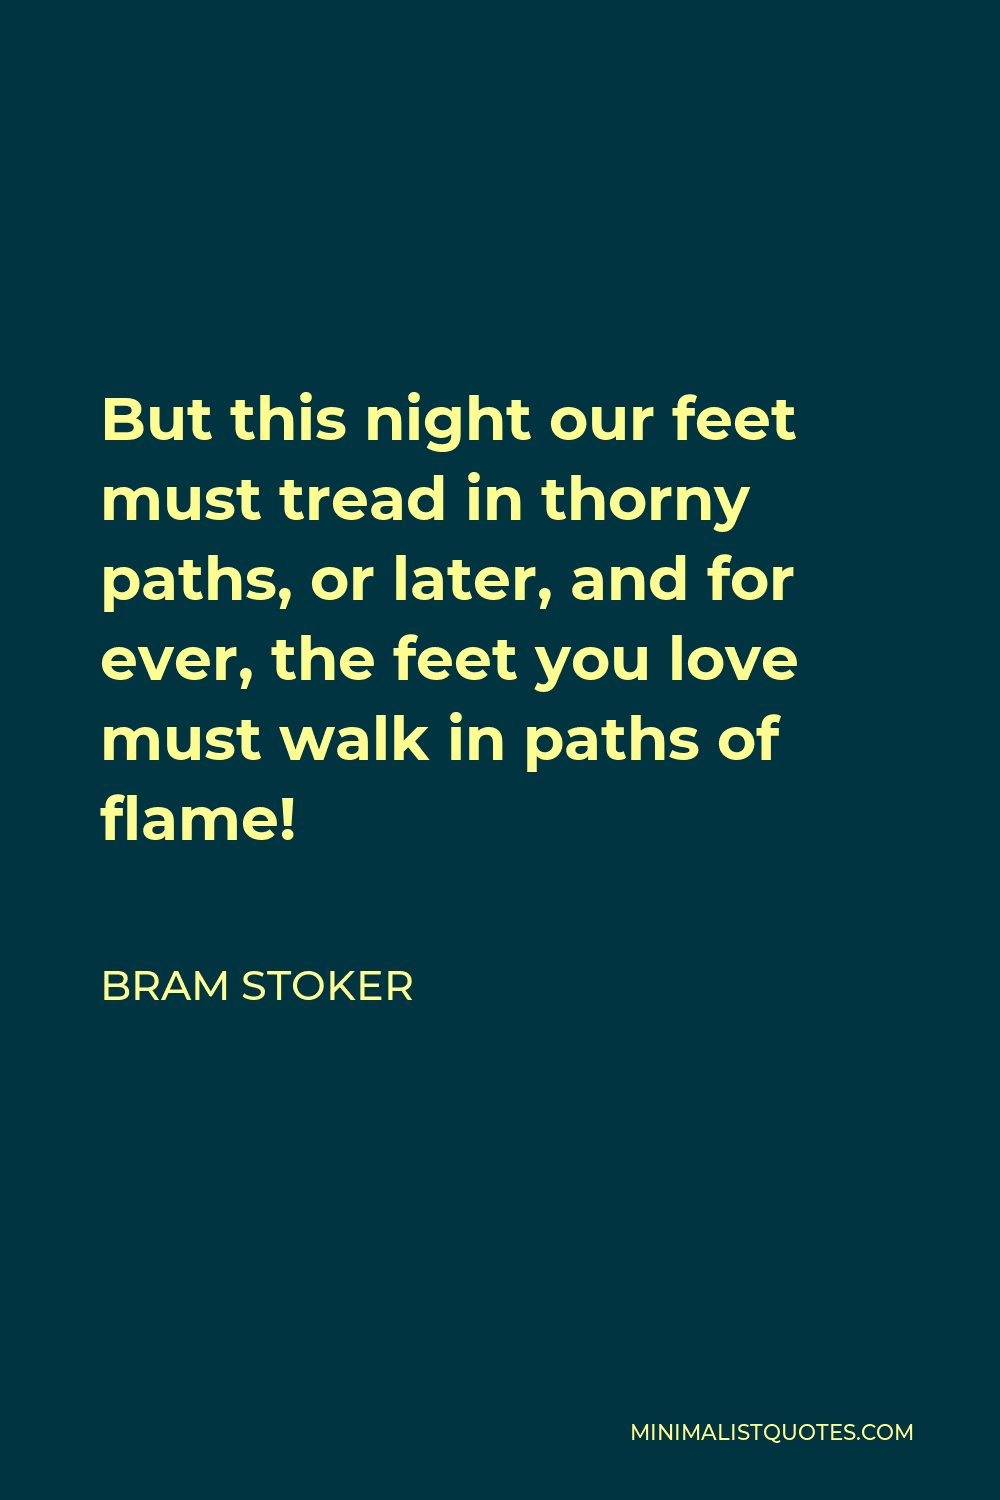 Bram Stoker Quote - But this night our feet must tread in thorny paths, or later, and for ever, the feet you love must walk in paths of flame!